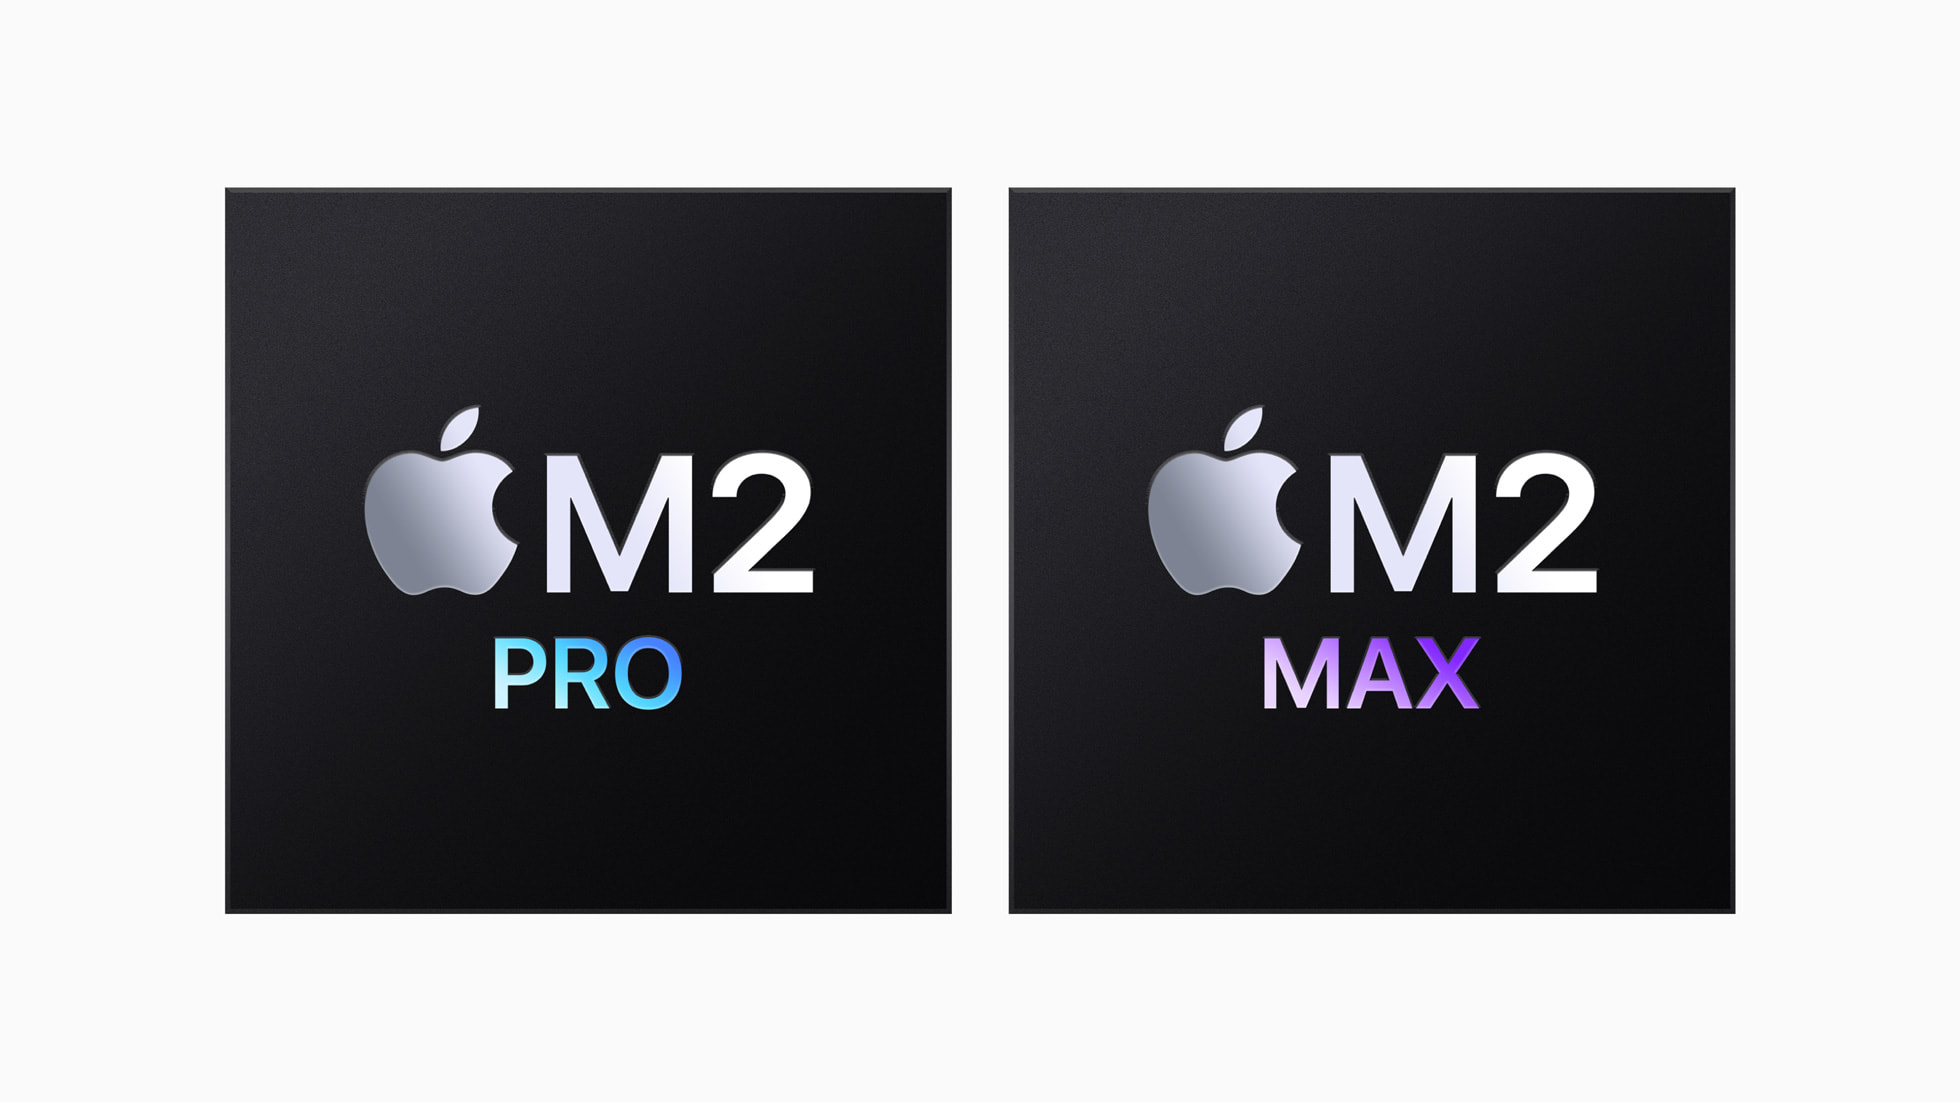 Apple M2 Pro and M2 Max chips.